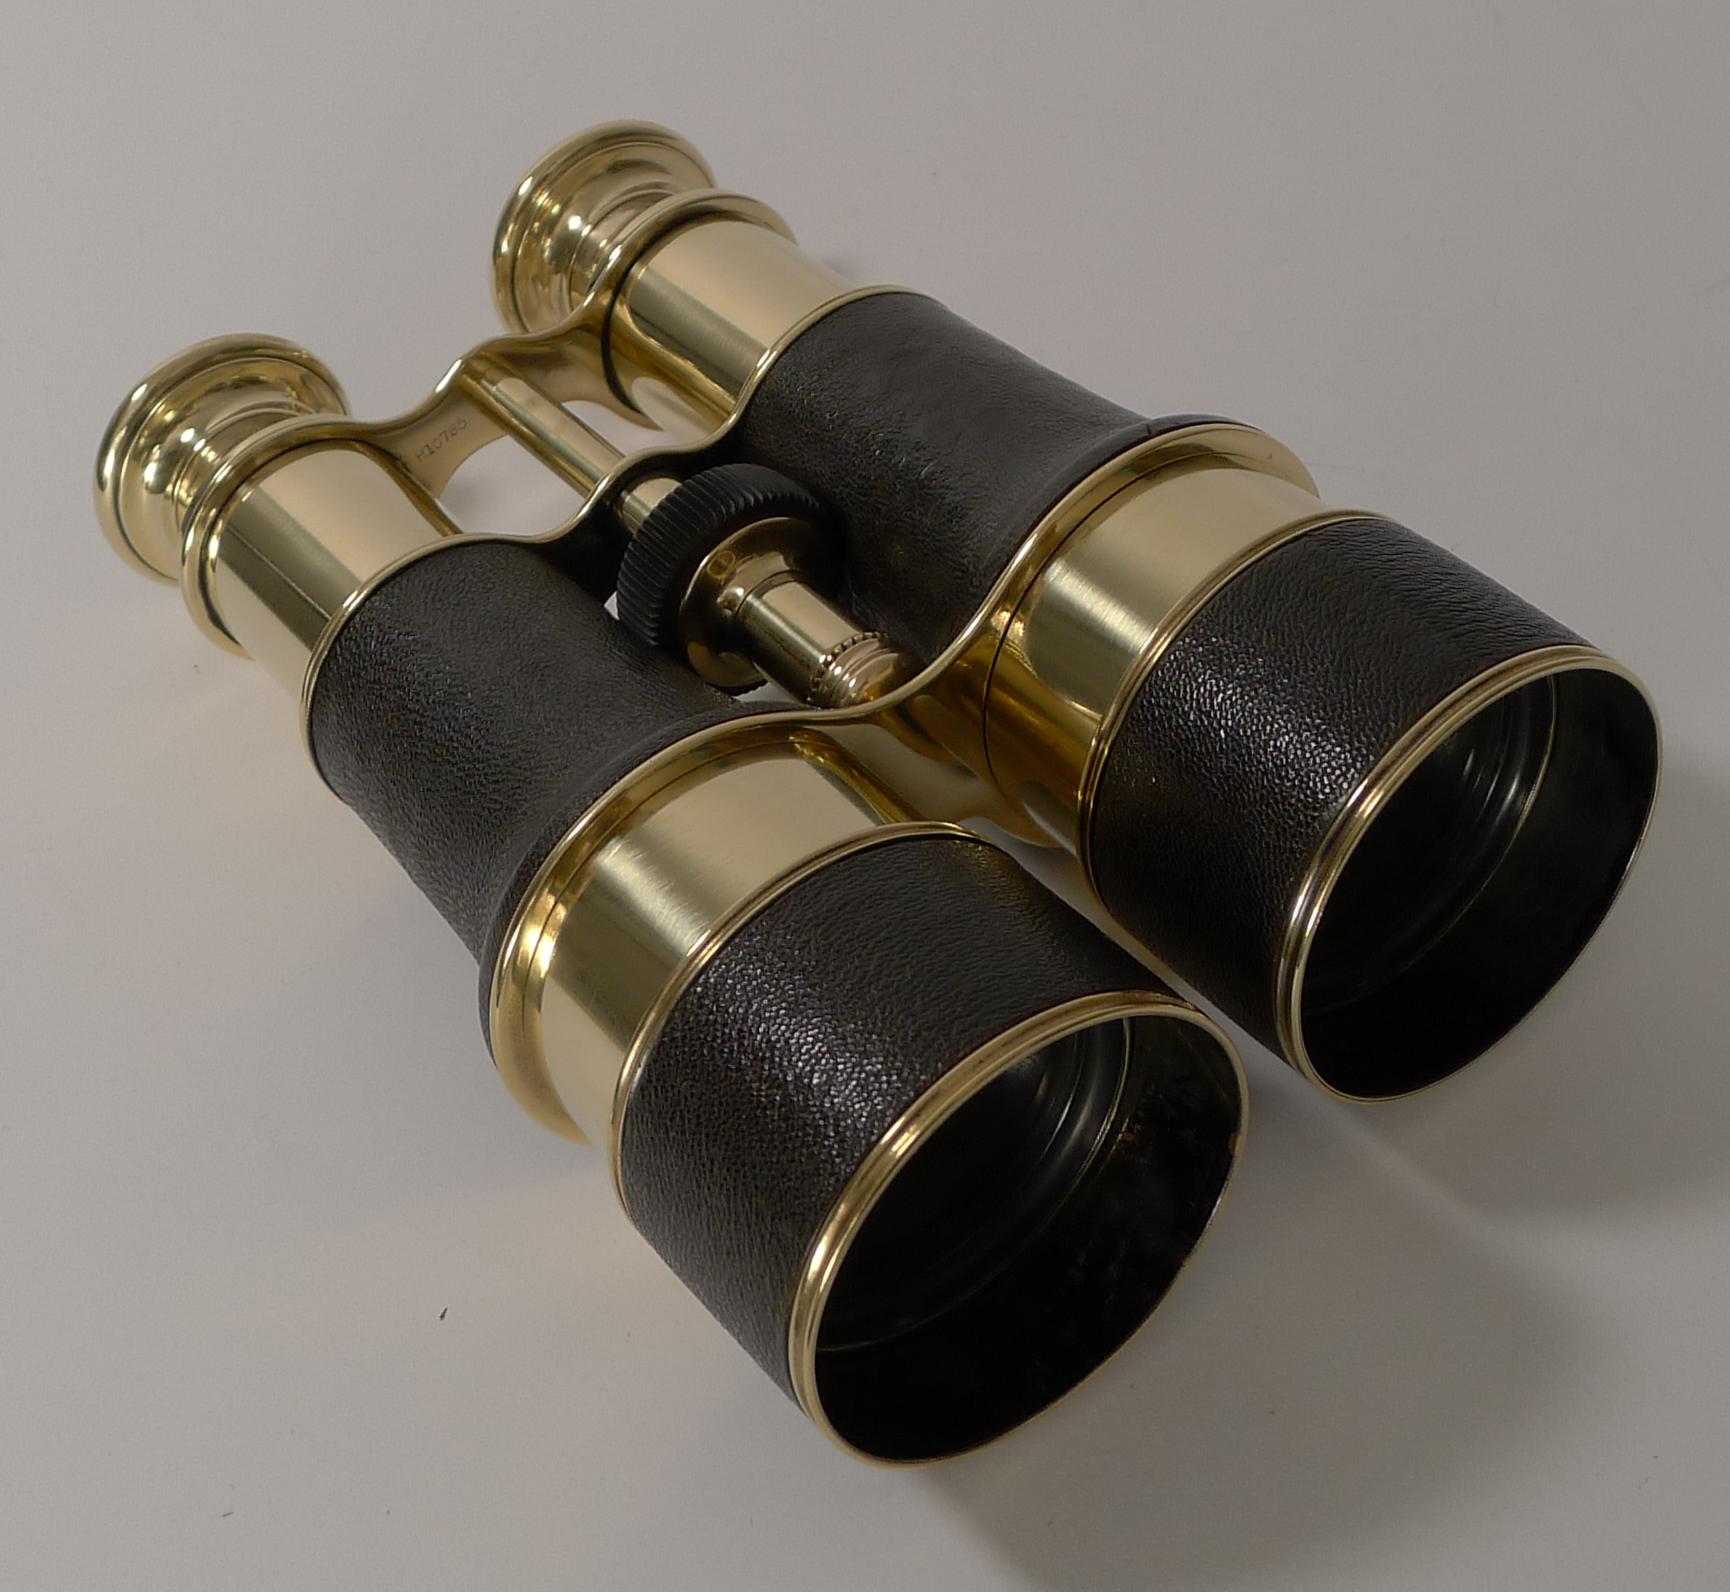 Pair of WW1 Binoculars and Case, British Officer's Issue, 1917, LeMaire, Paris 3